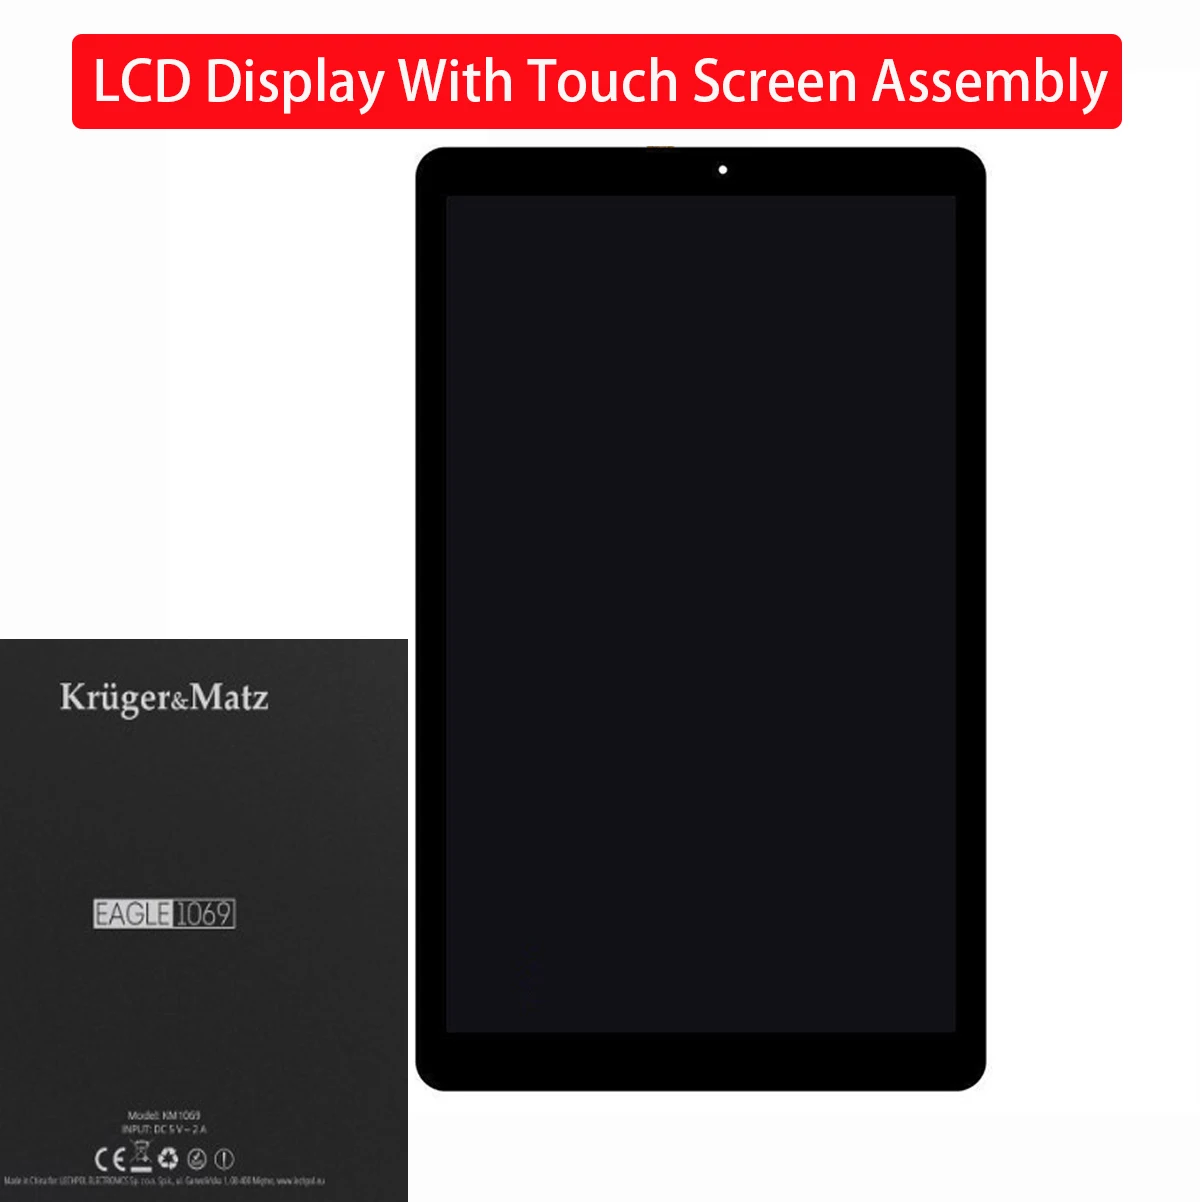 

Original LCD Display Touch Screen Digitizer Assembly Glass Sensor For Kruger&Matz Eagle 1069 Tablet PC Pantalla Replacement